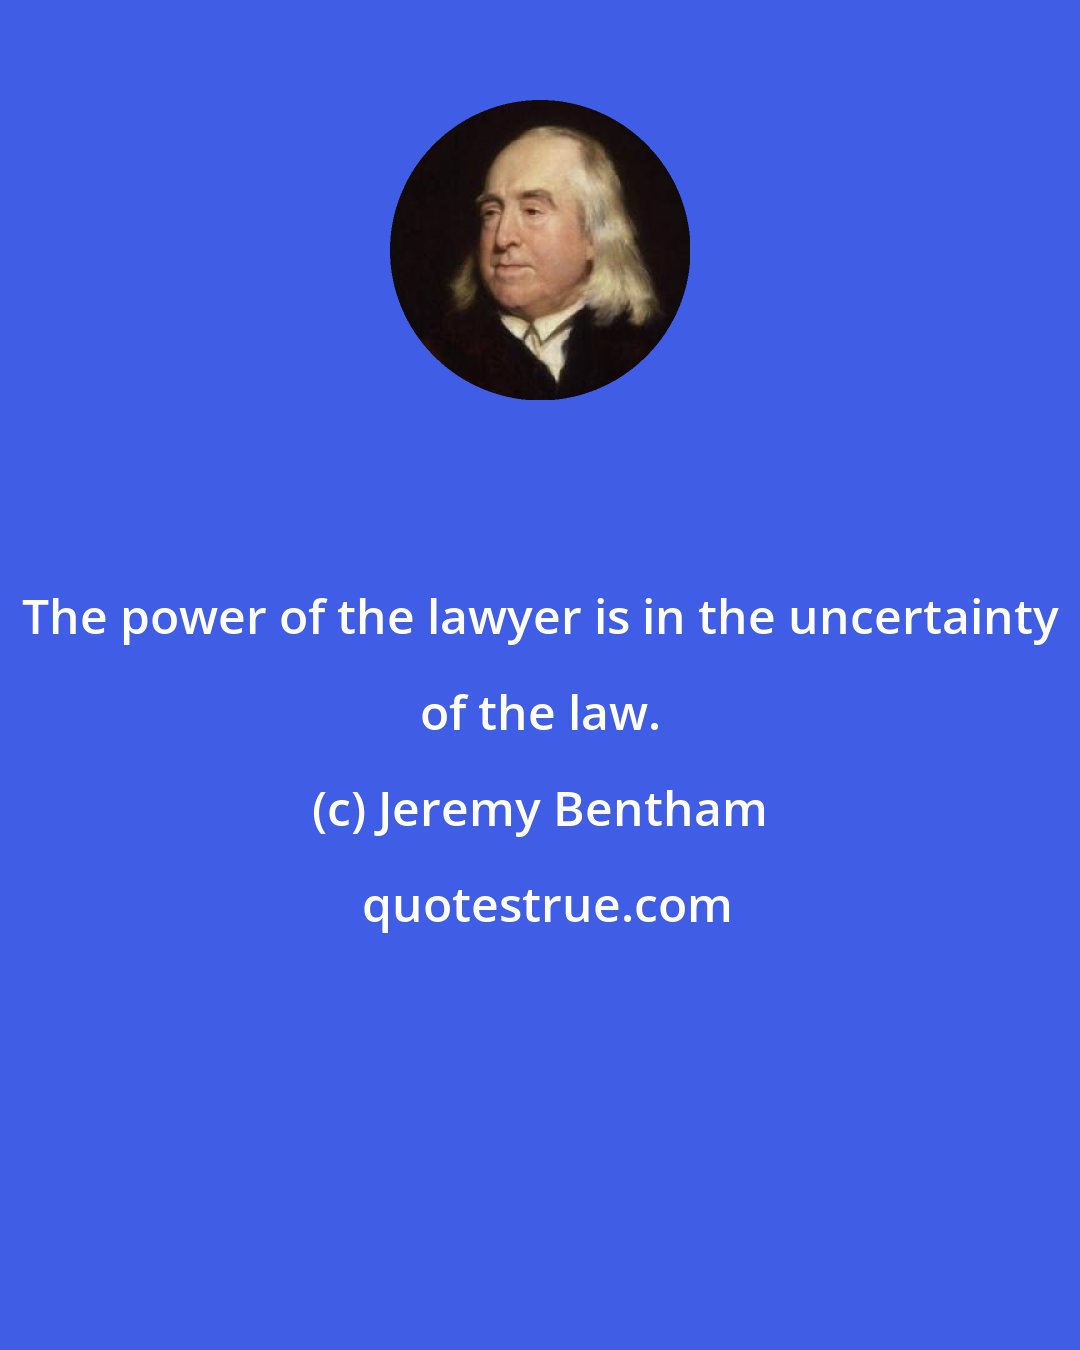 Jeremy Bentham: The power of the lawyer is in the uncertainty of the law.